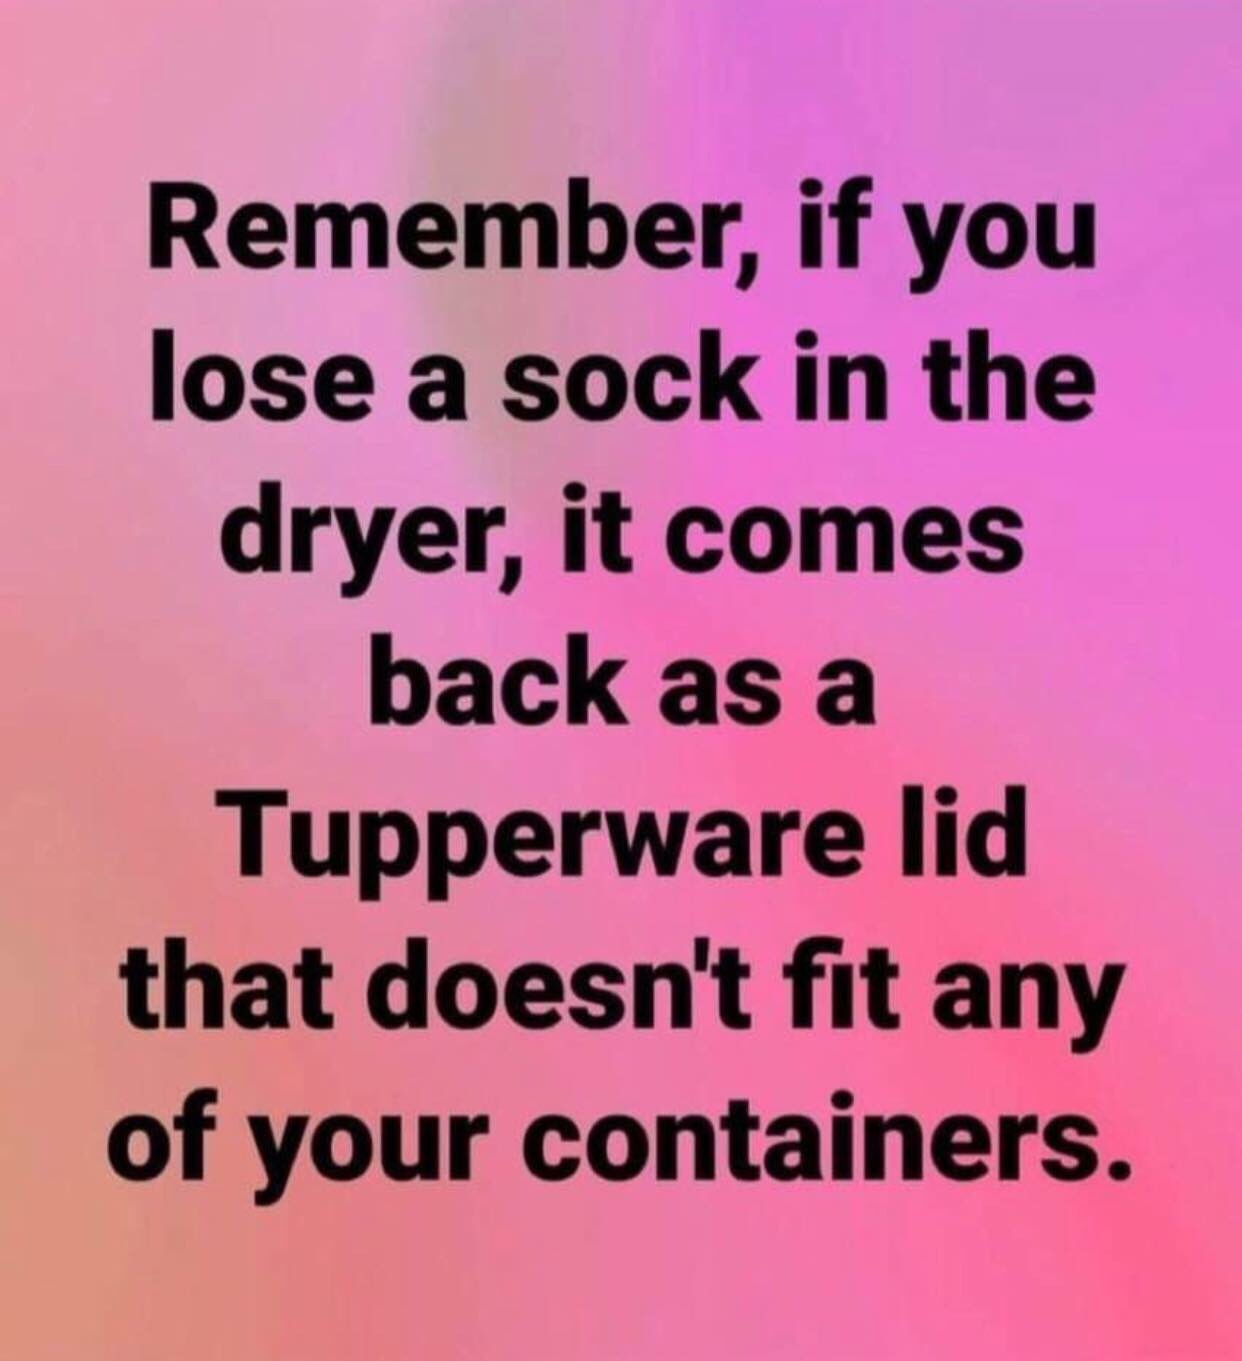 remember if you lose a sock - Remember, if you lose a sock in the dryer, it comes back as a Tupperware lid that doesn't fit any of your containers.